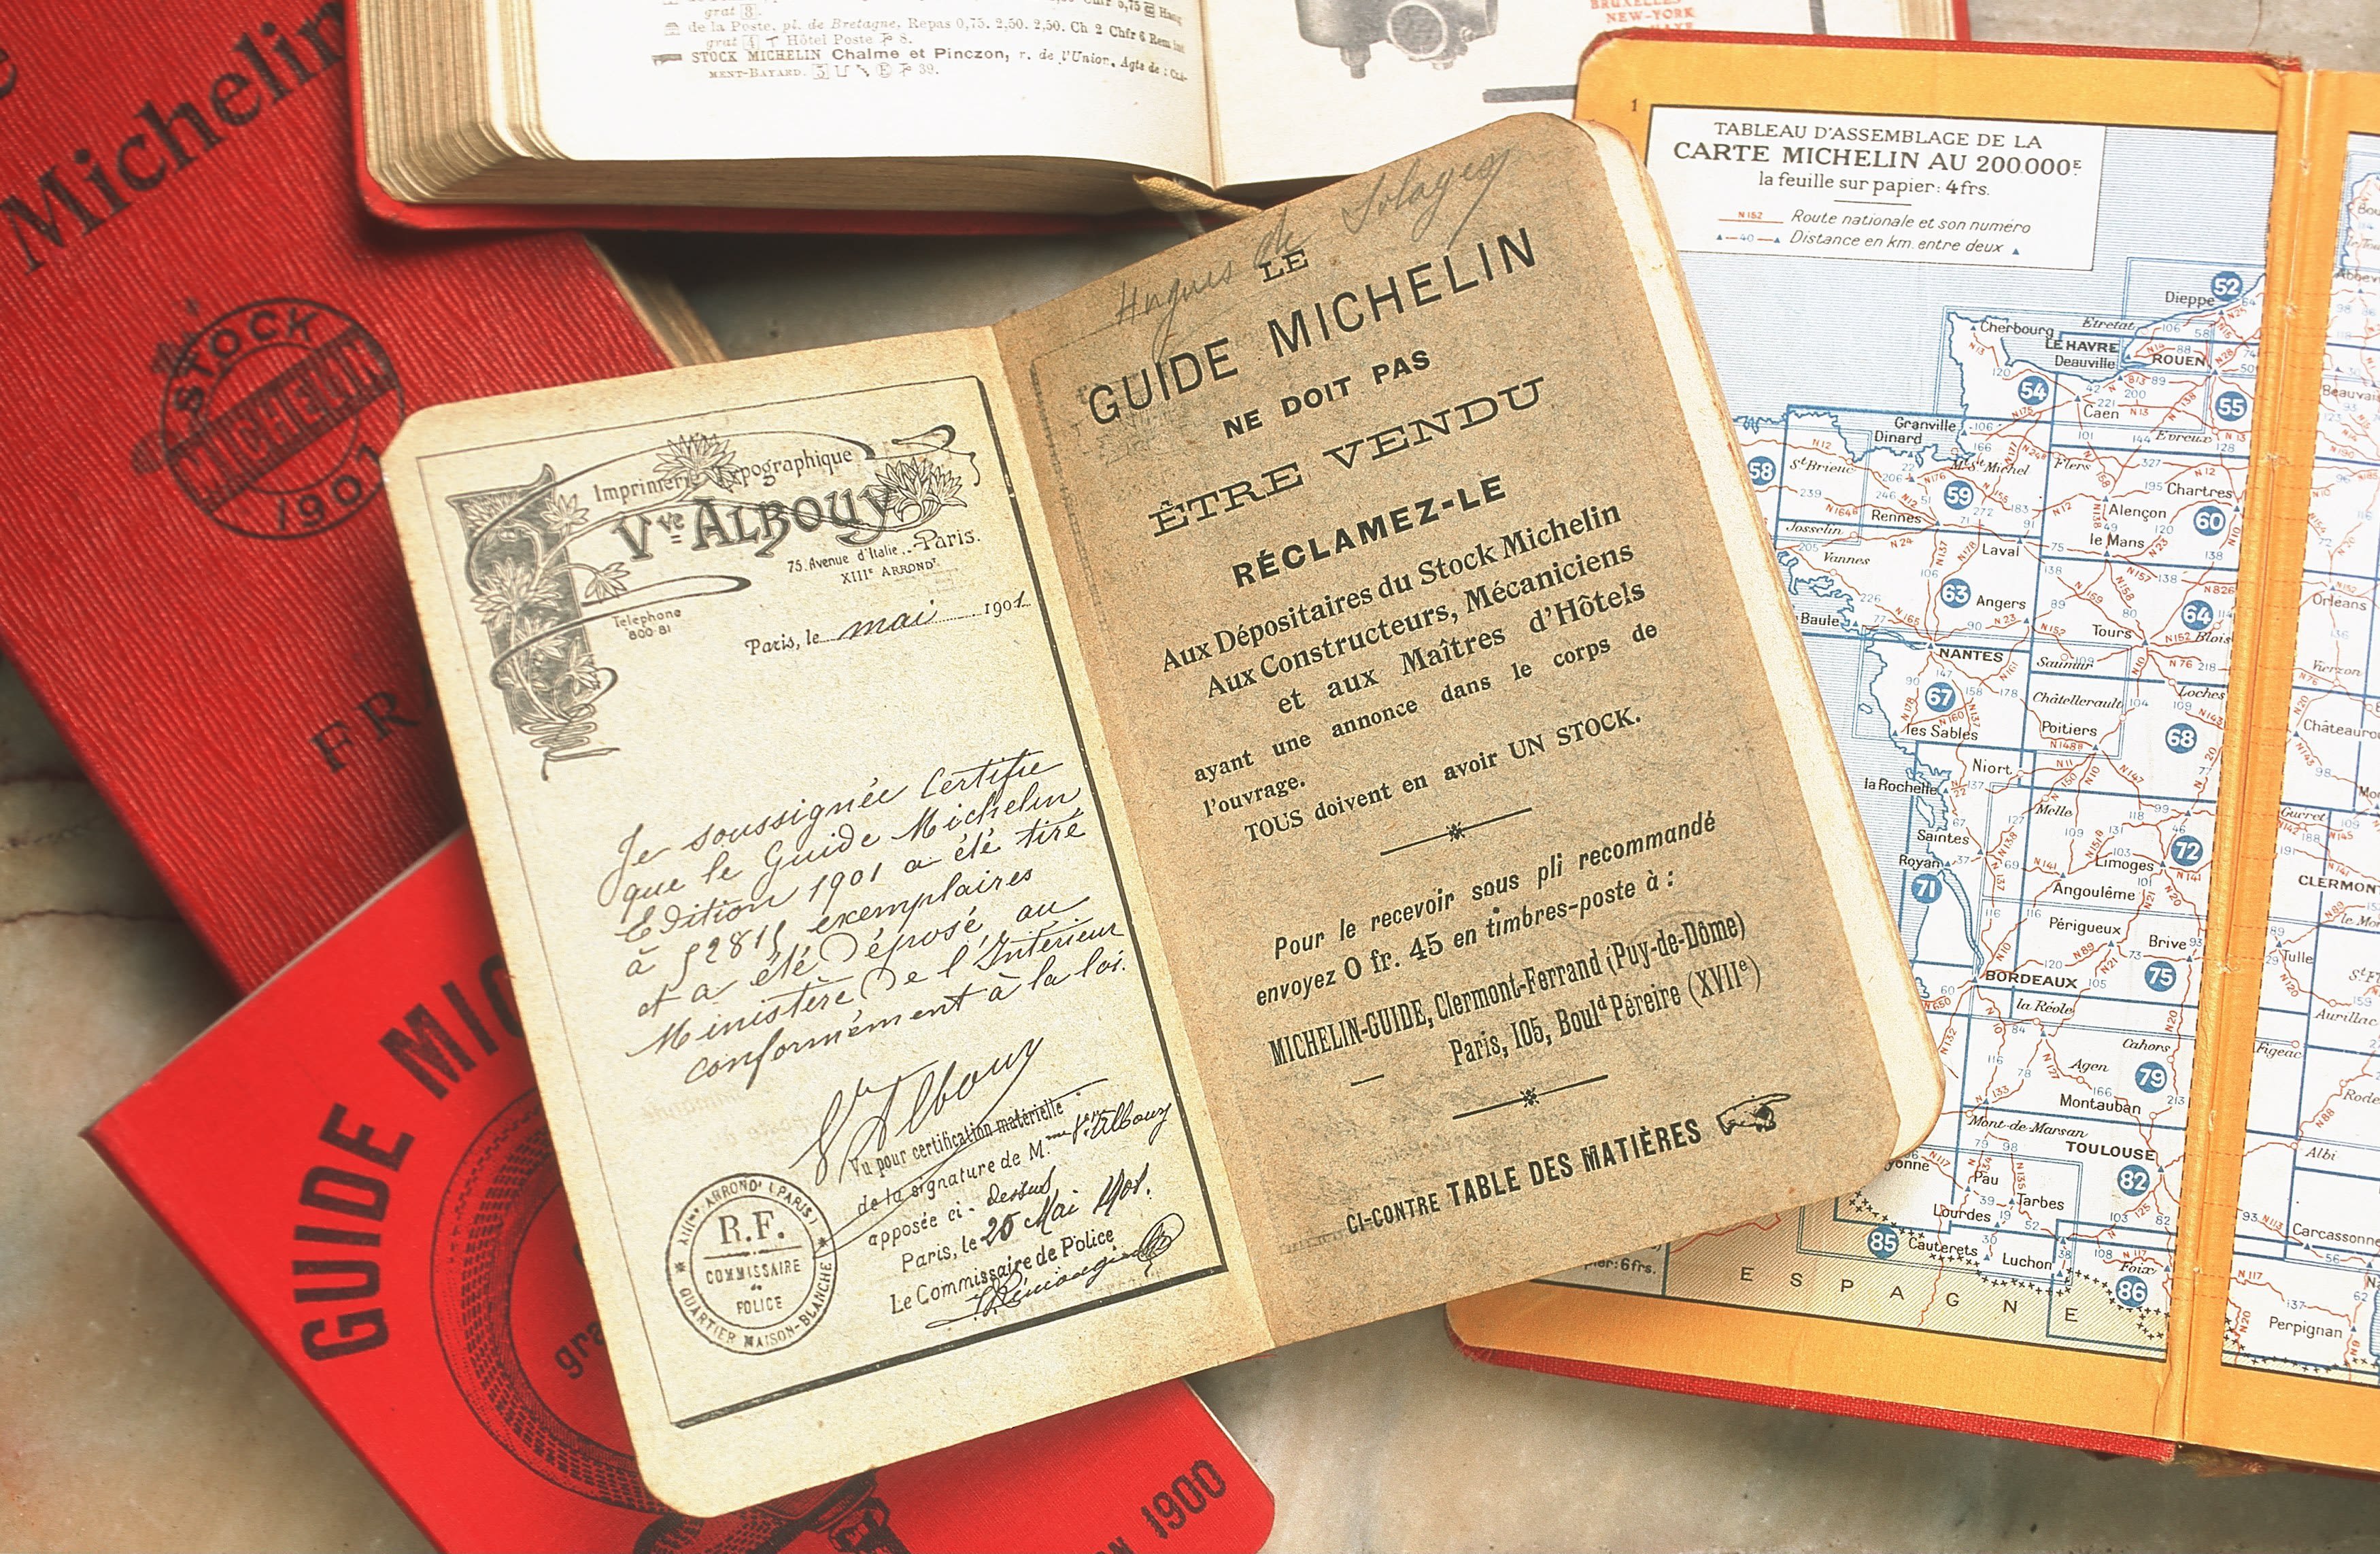 Michelin Guide history: How did a tire company become a restaurant rating  guide?